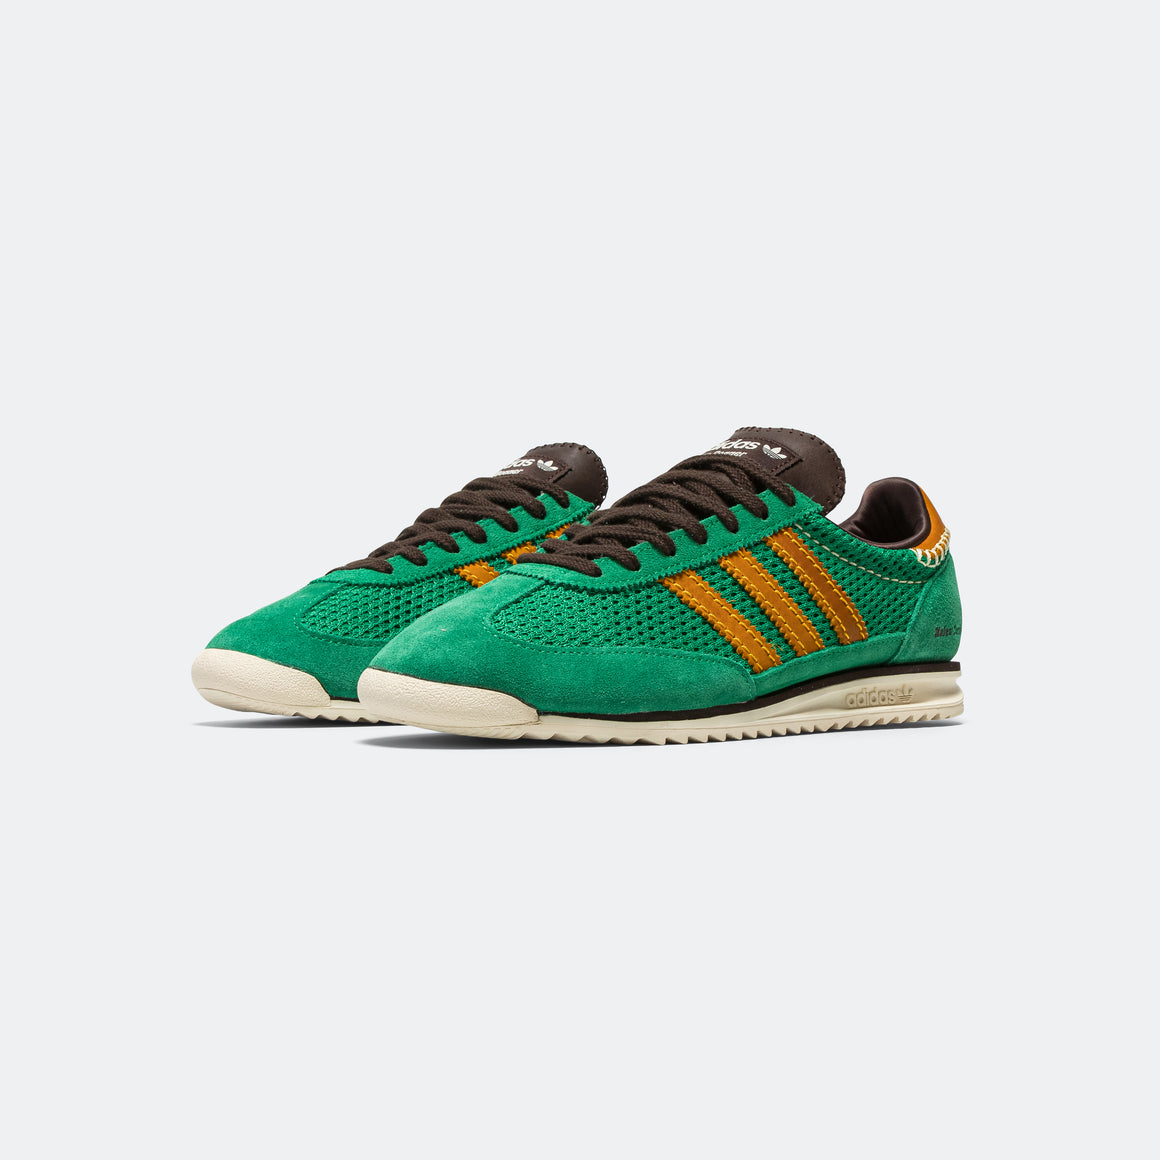 adidas - SL72 Knit x Wales Bonner - TEAGRN/COGOLD-DBROWN - UP THERE